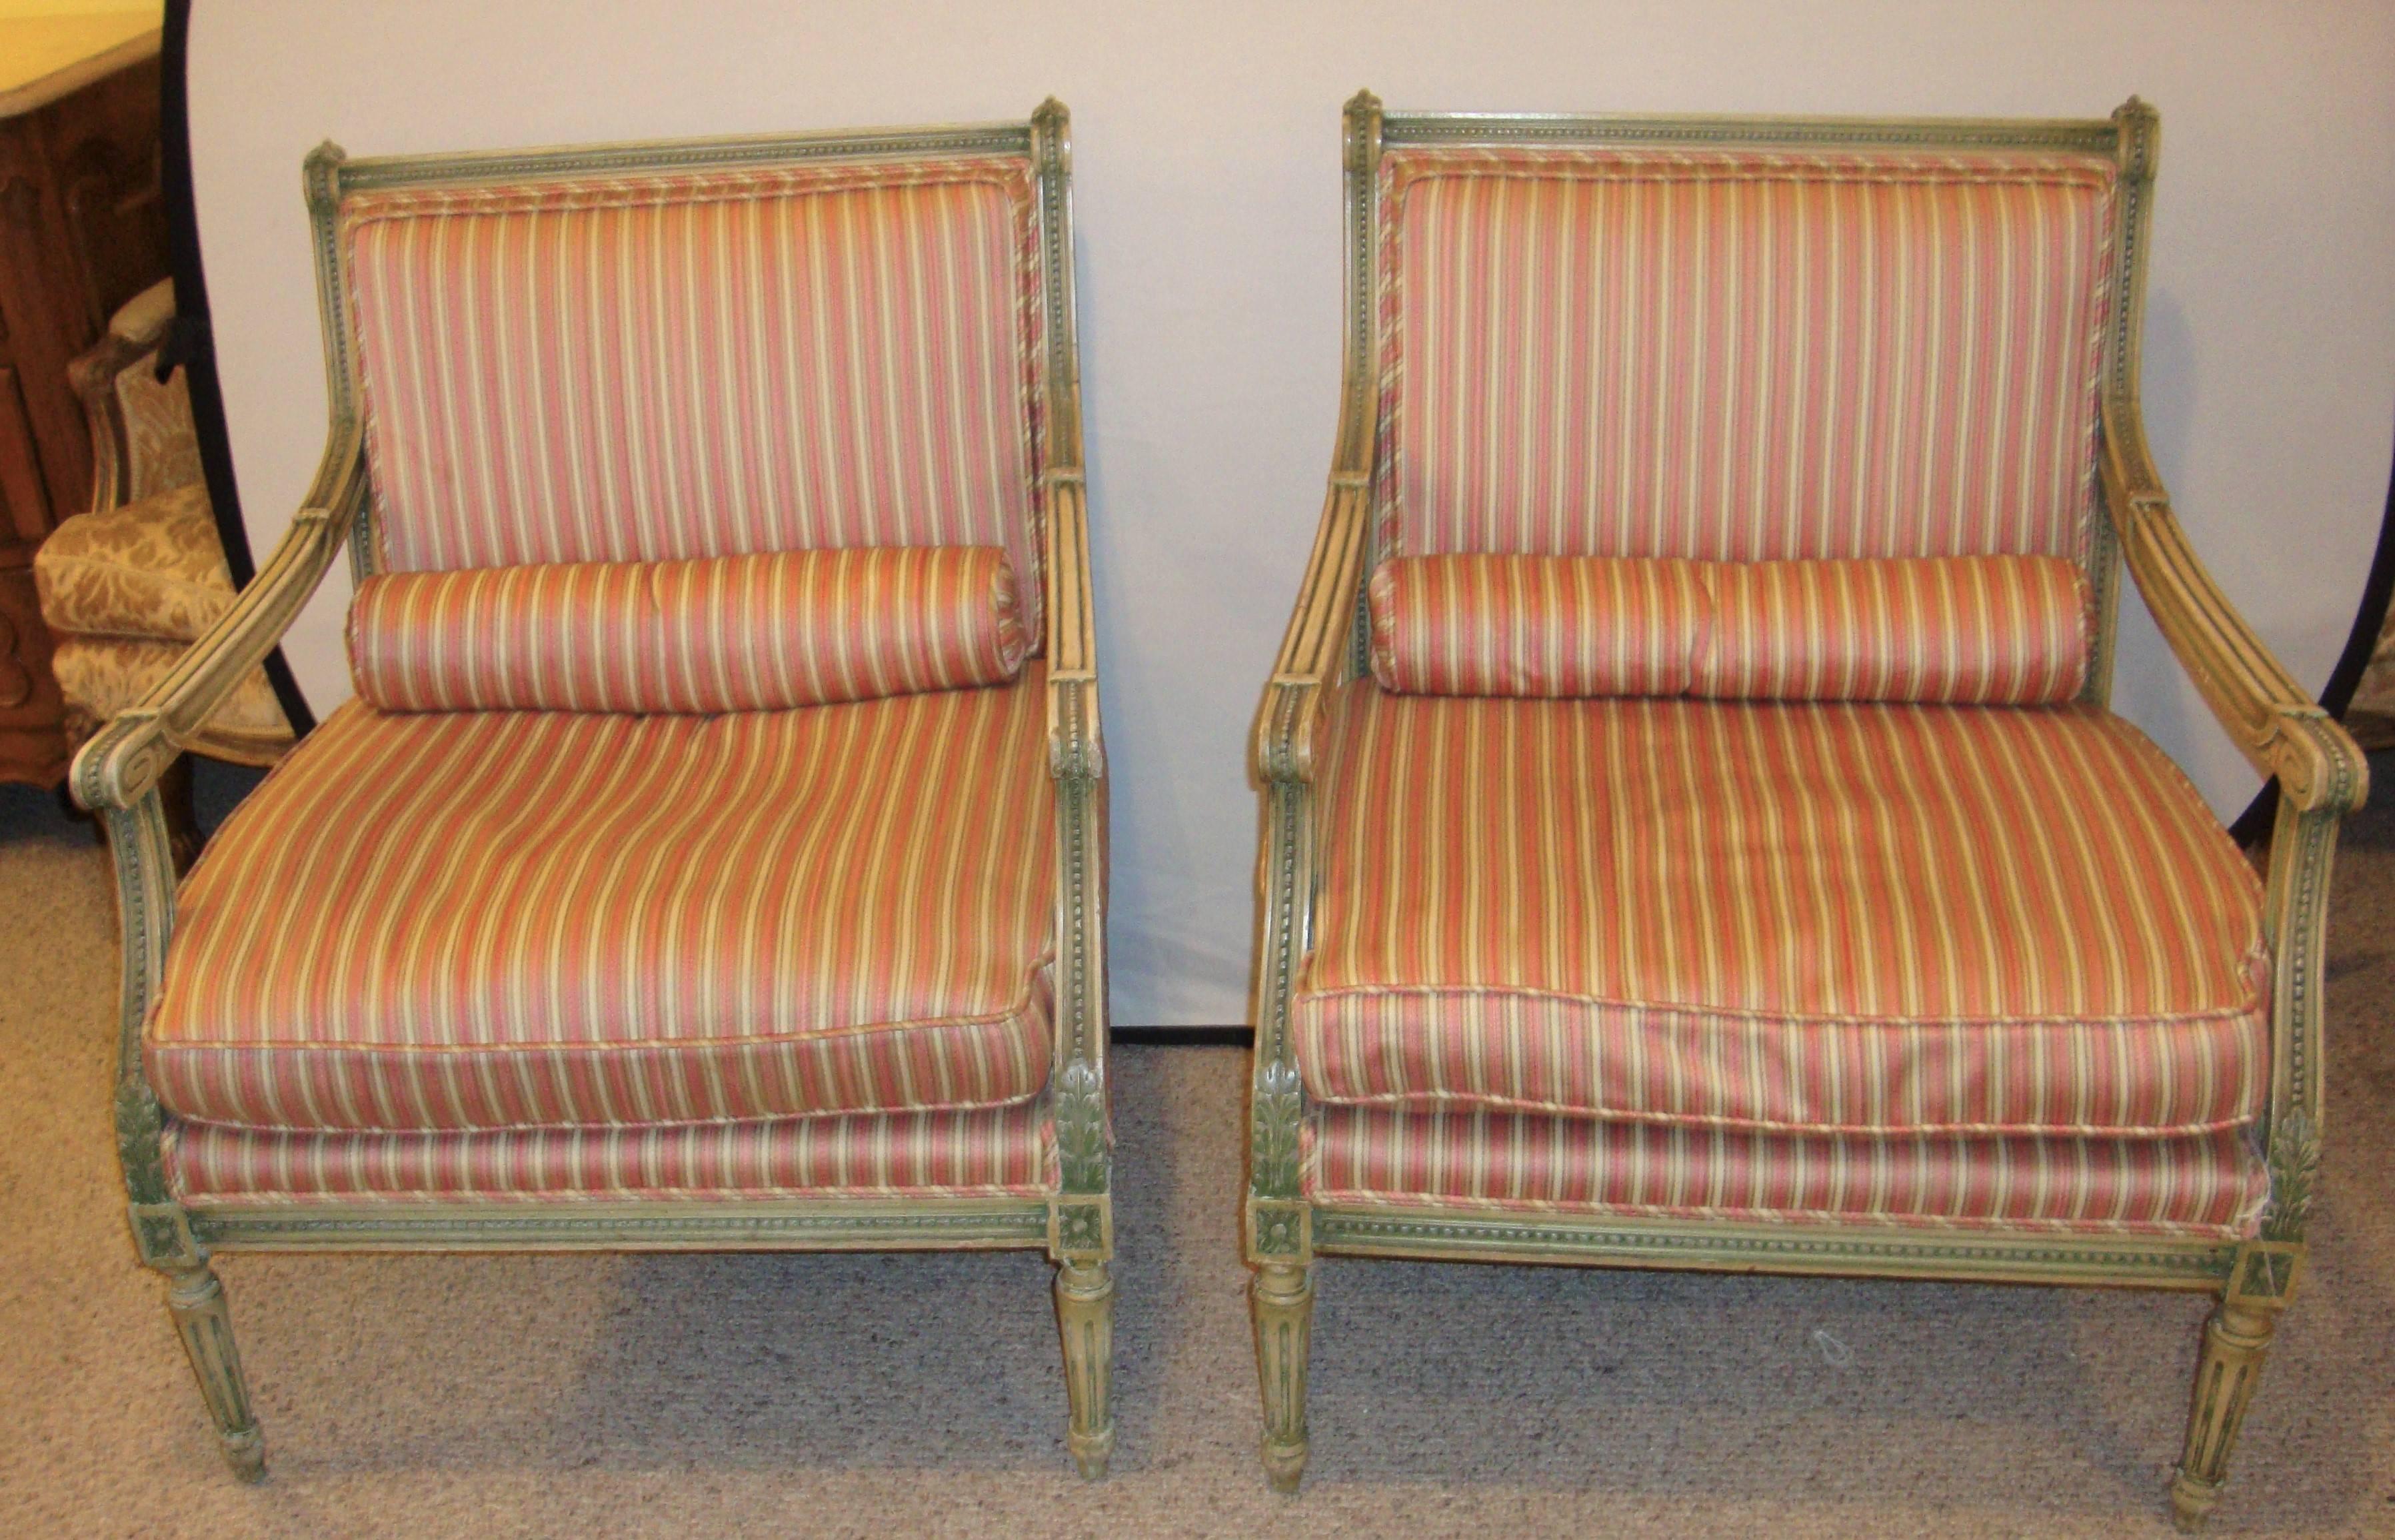 Pair of Louis XVI style Marquies by Maison Jansen. In an off-white gray greenish paint decorated frame with stripped upholstery.

Seat height: 17 inches.